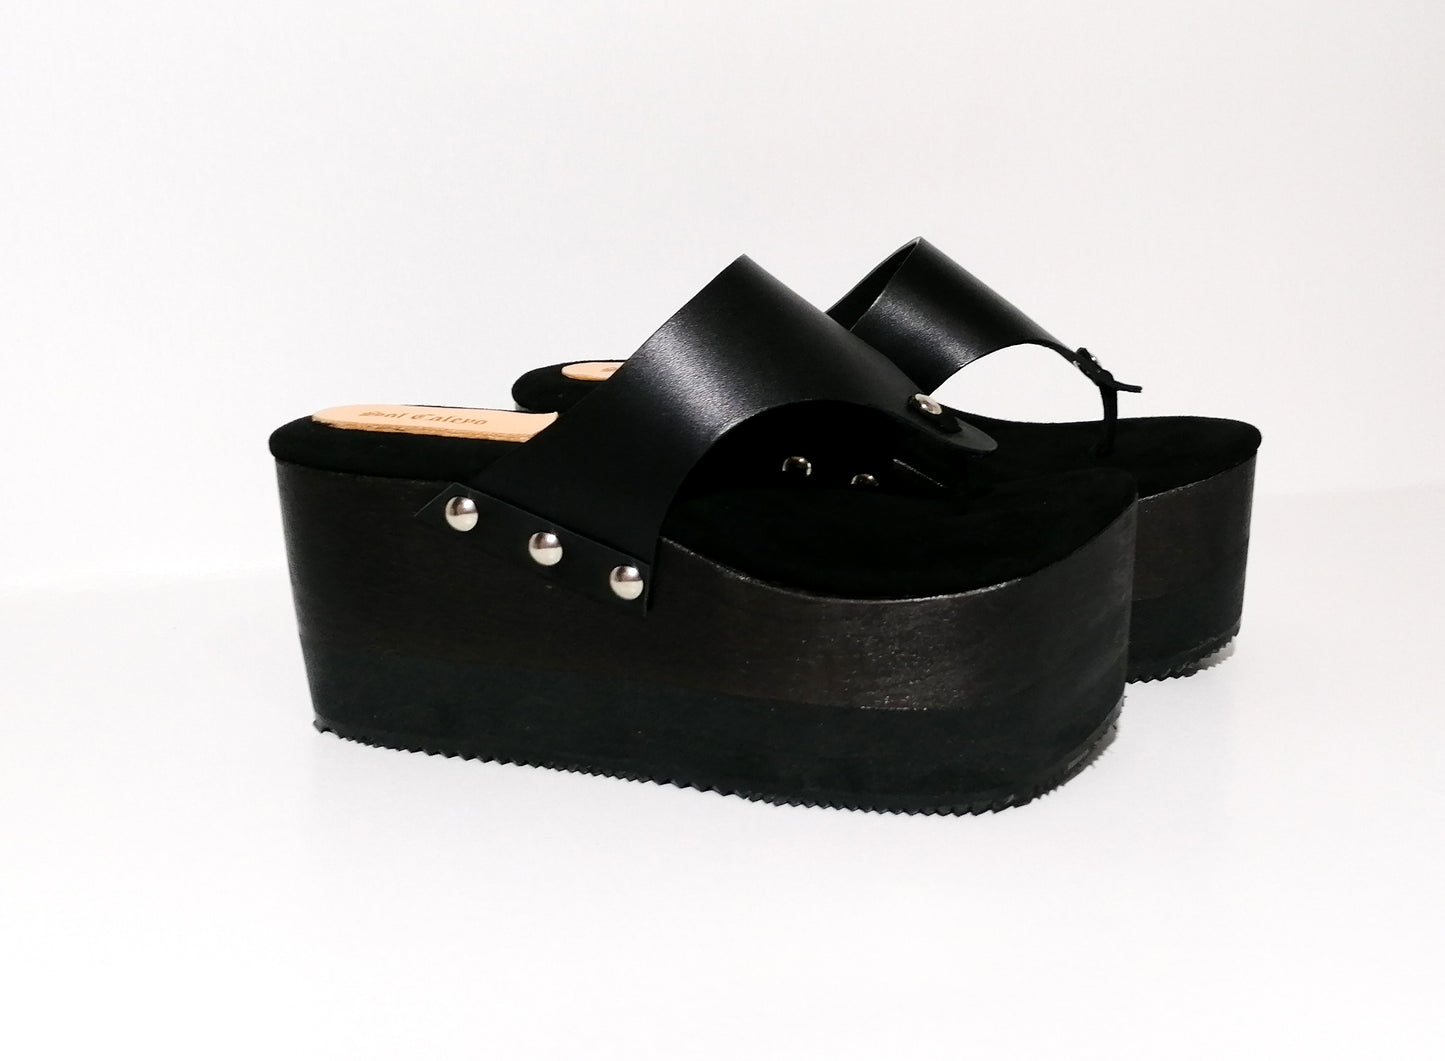 Black flip flop style platform clog sandal. Platform wedge. Black leather flip flop style sandal. Sizes 34 to 47. High quality leather shoes handmade by Sol Caleyo.